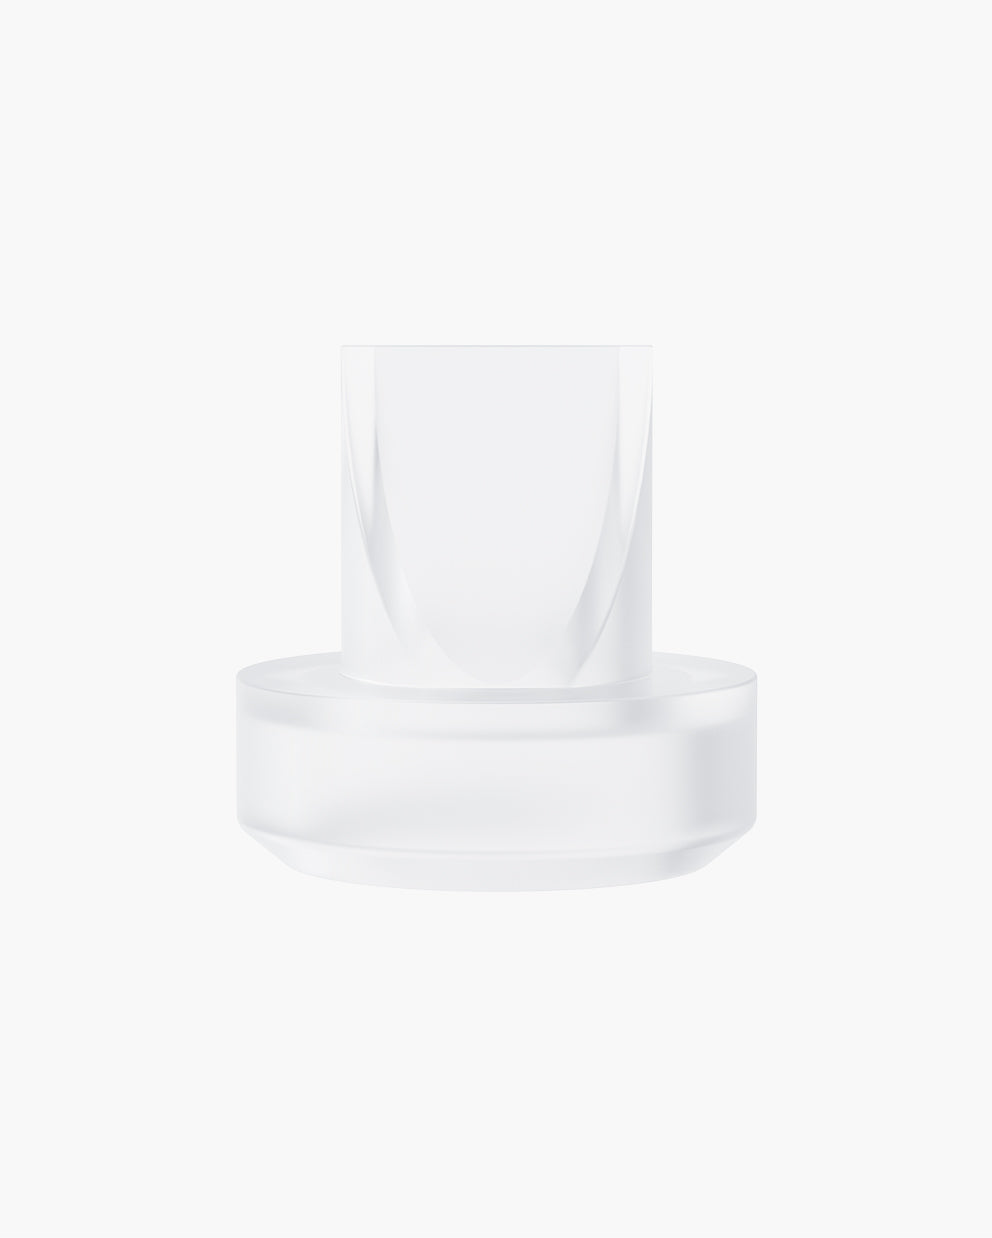 Silicone Diaphragm + Valve for S9 Pro/S12 Pro Breast Pump Replacement